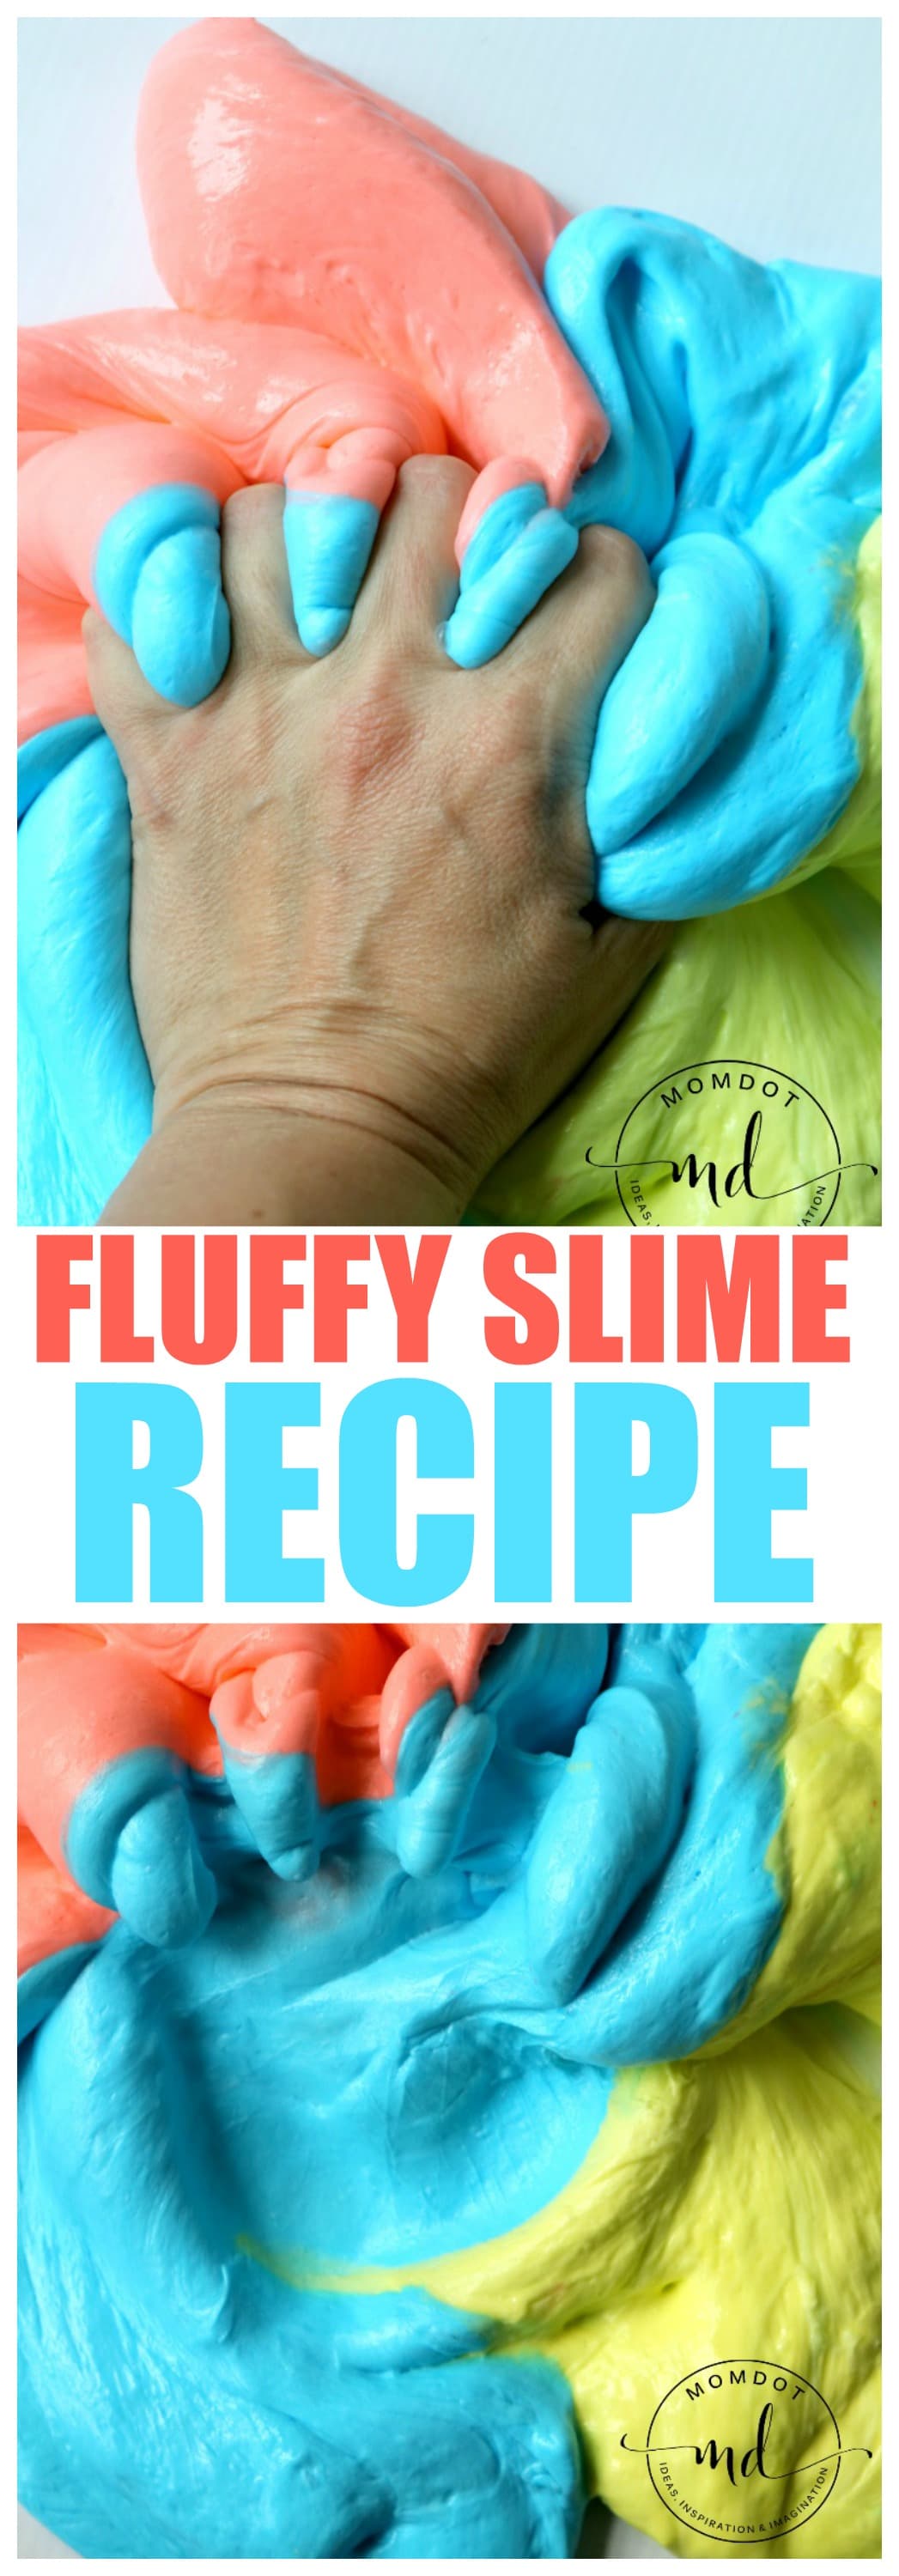 Fluffy Slime - 3 Ingredients to squishy Slime that retains shape - FLUBBER